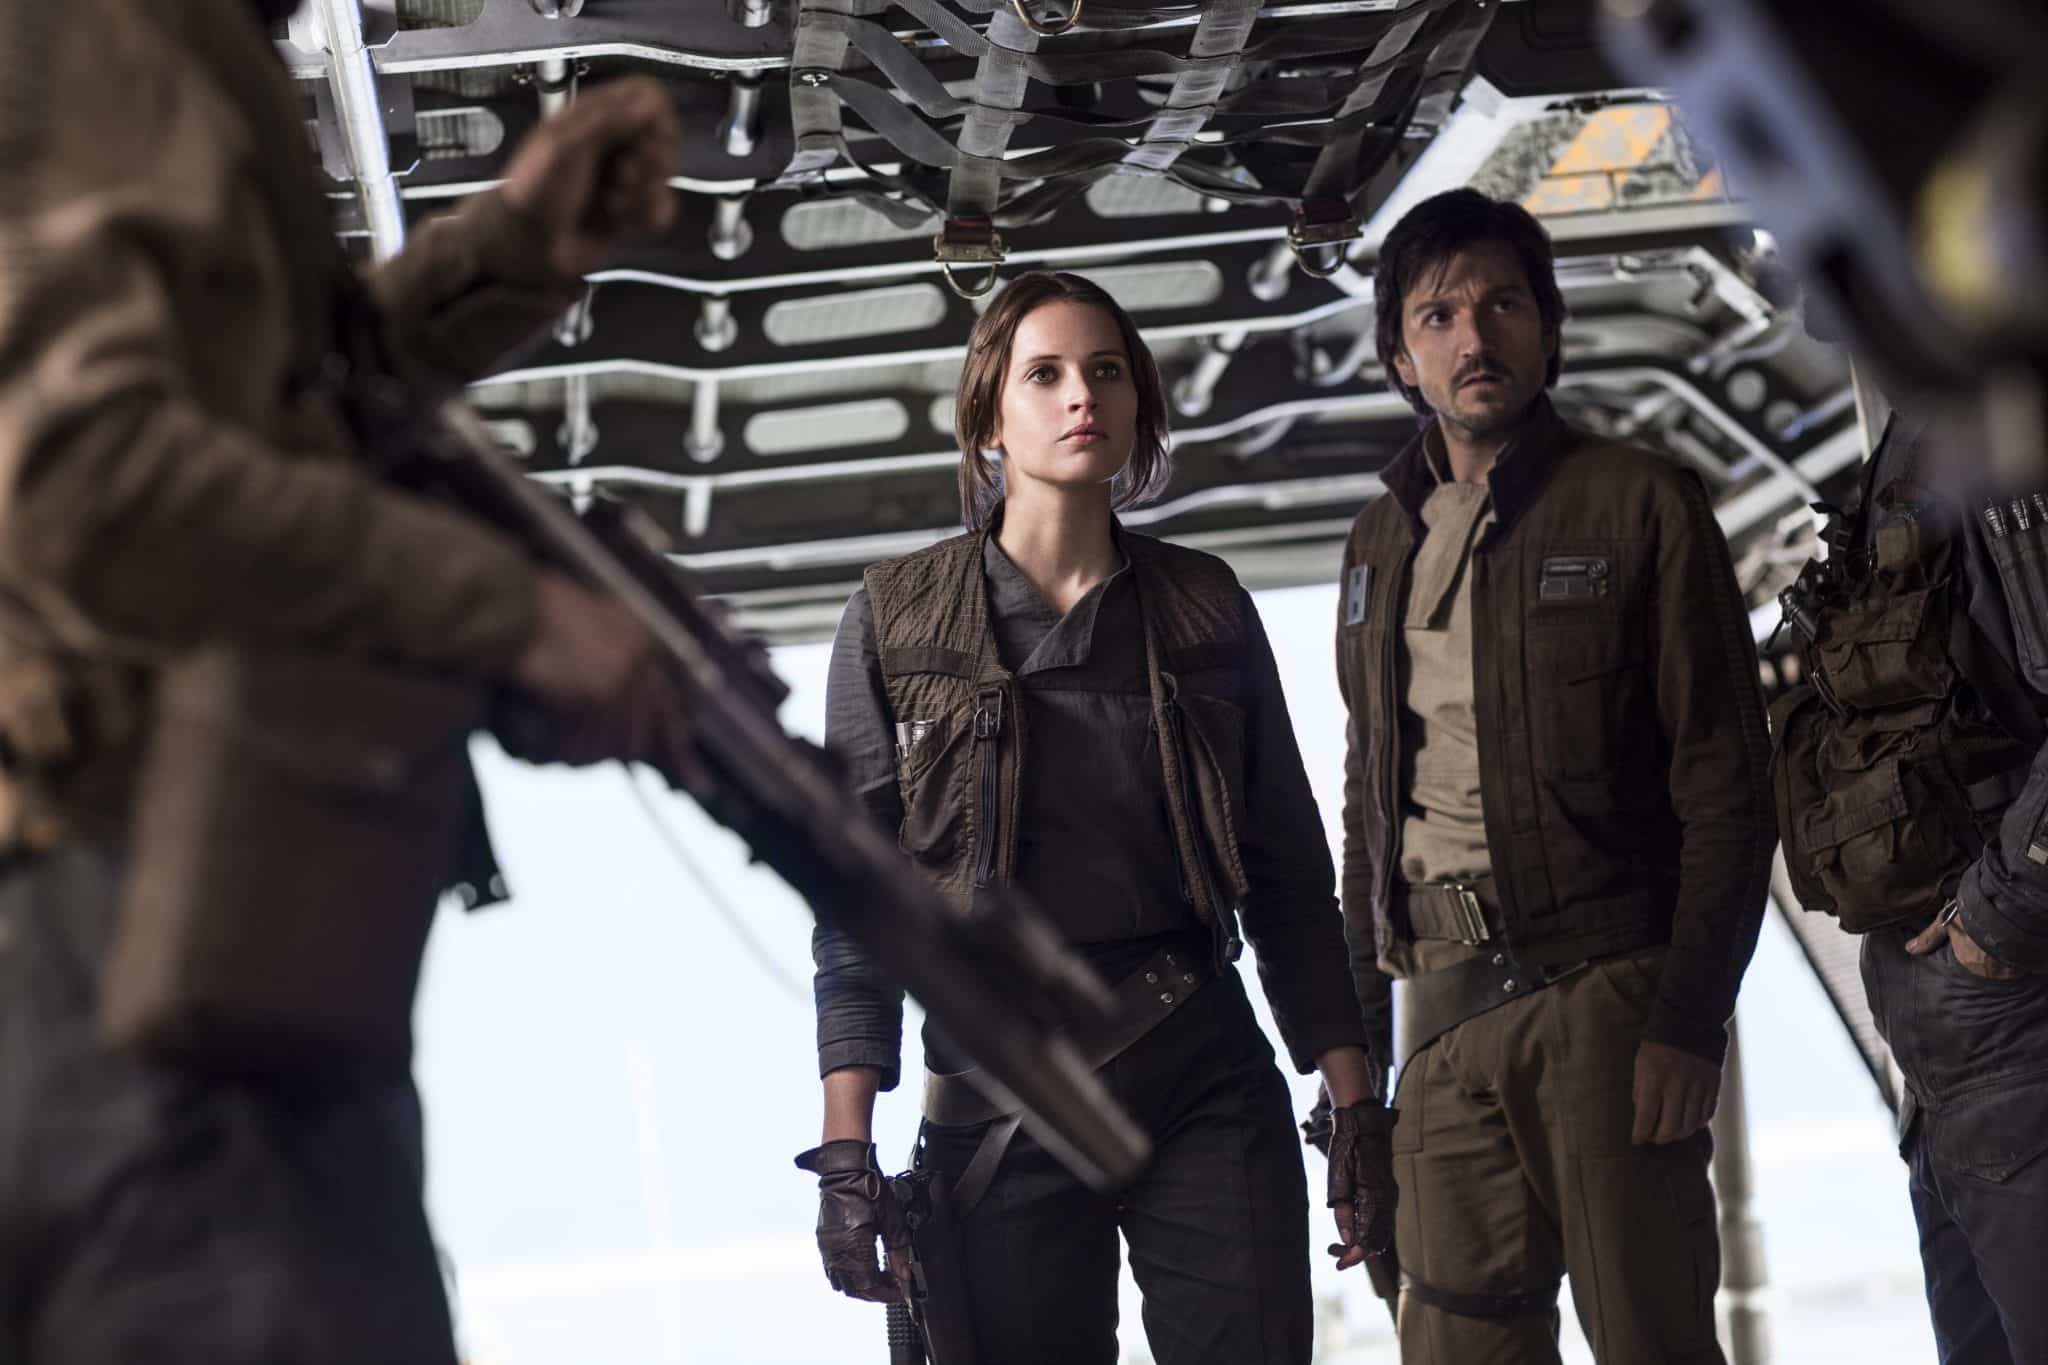 Rogue One: A Star Wars Story..L to R: Jyn Erso (Felicity Jones) and Cassian Andor (Diego Luna)..Ph: Jonathan Olley..©Lucasfilm LFL 2016.